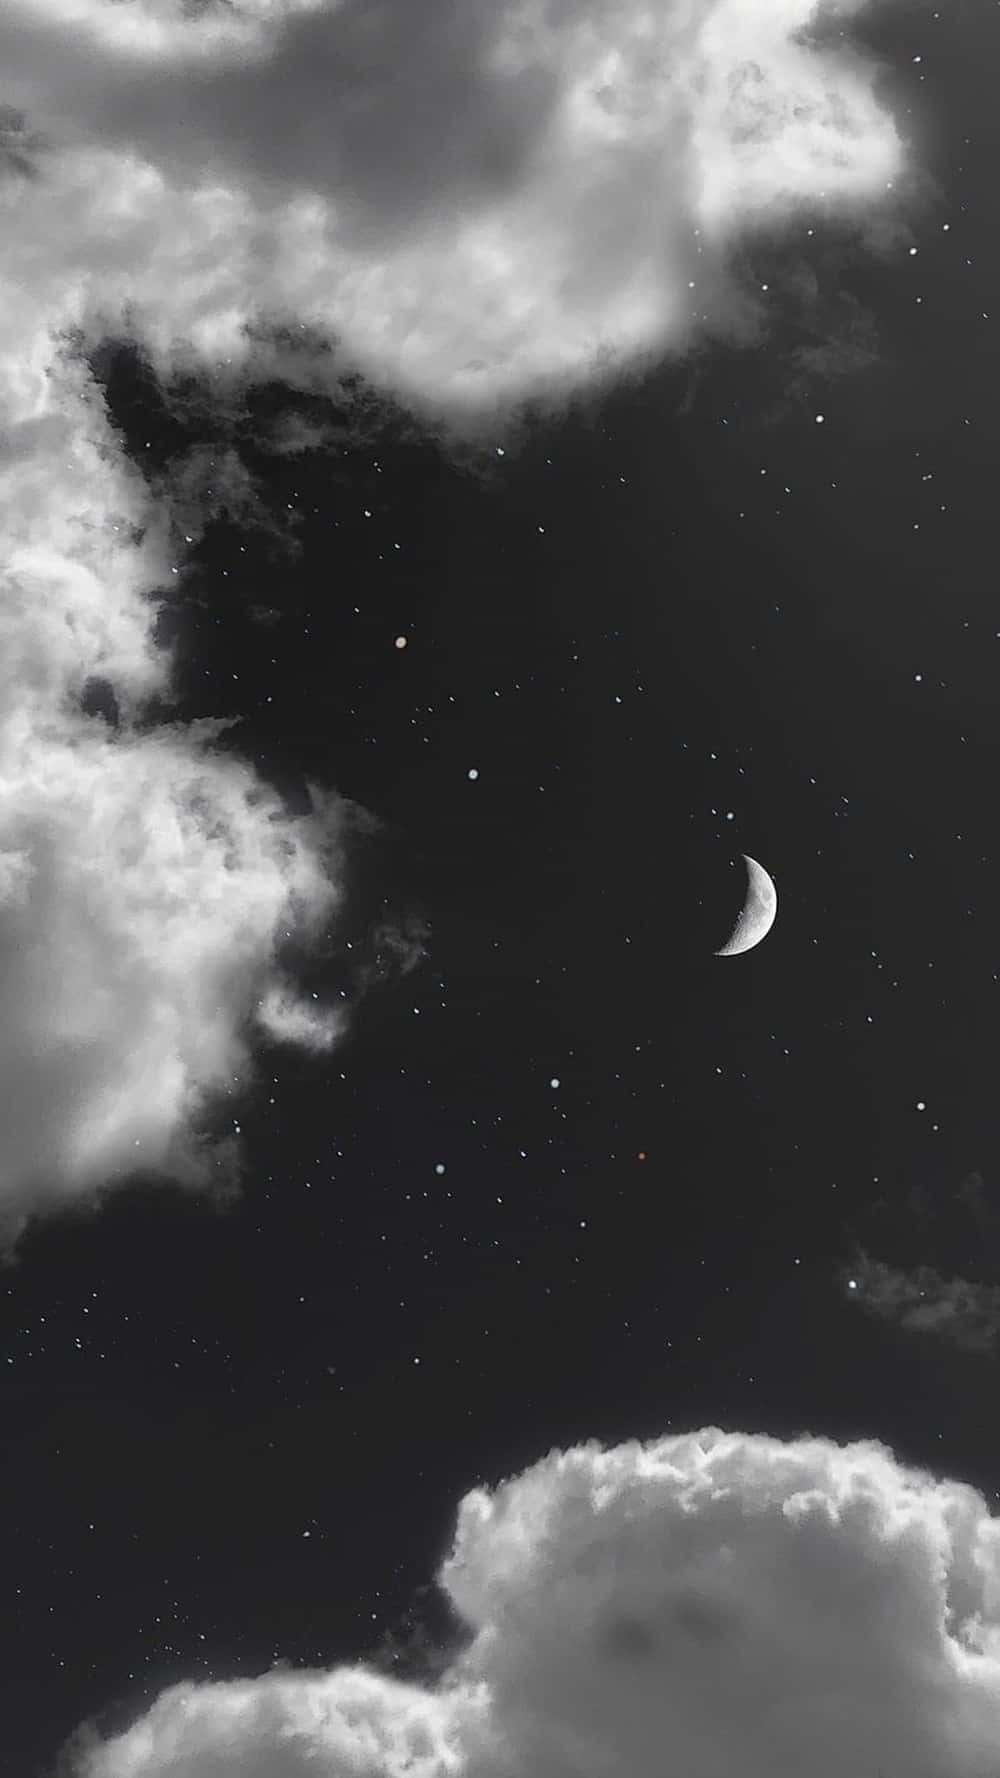 Black And White Cloud Night Sky Wallpaper